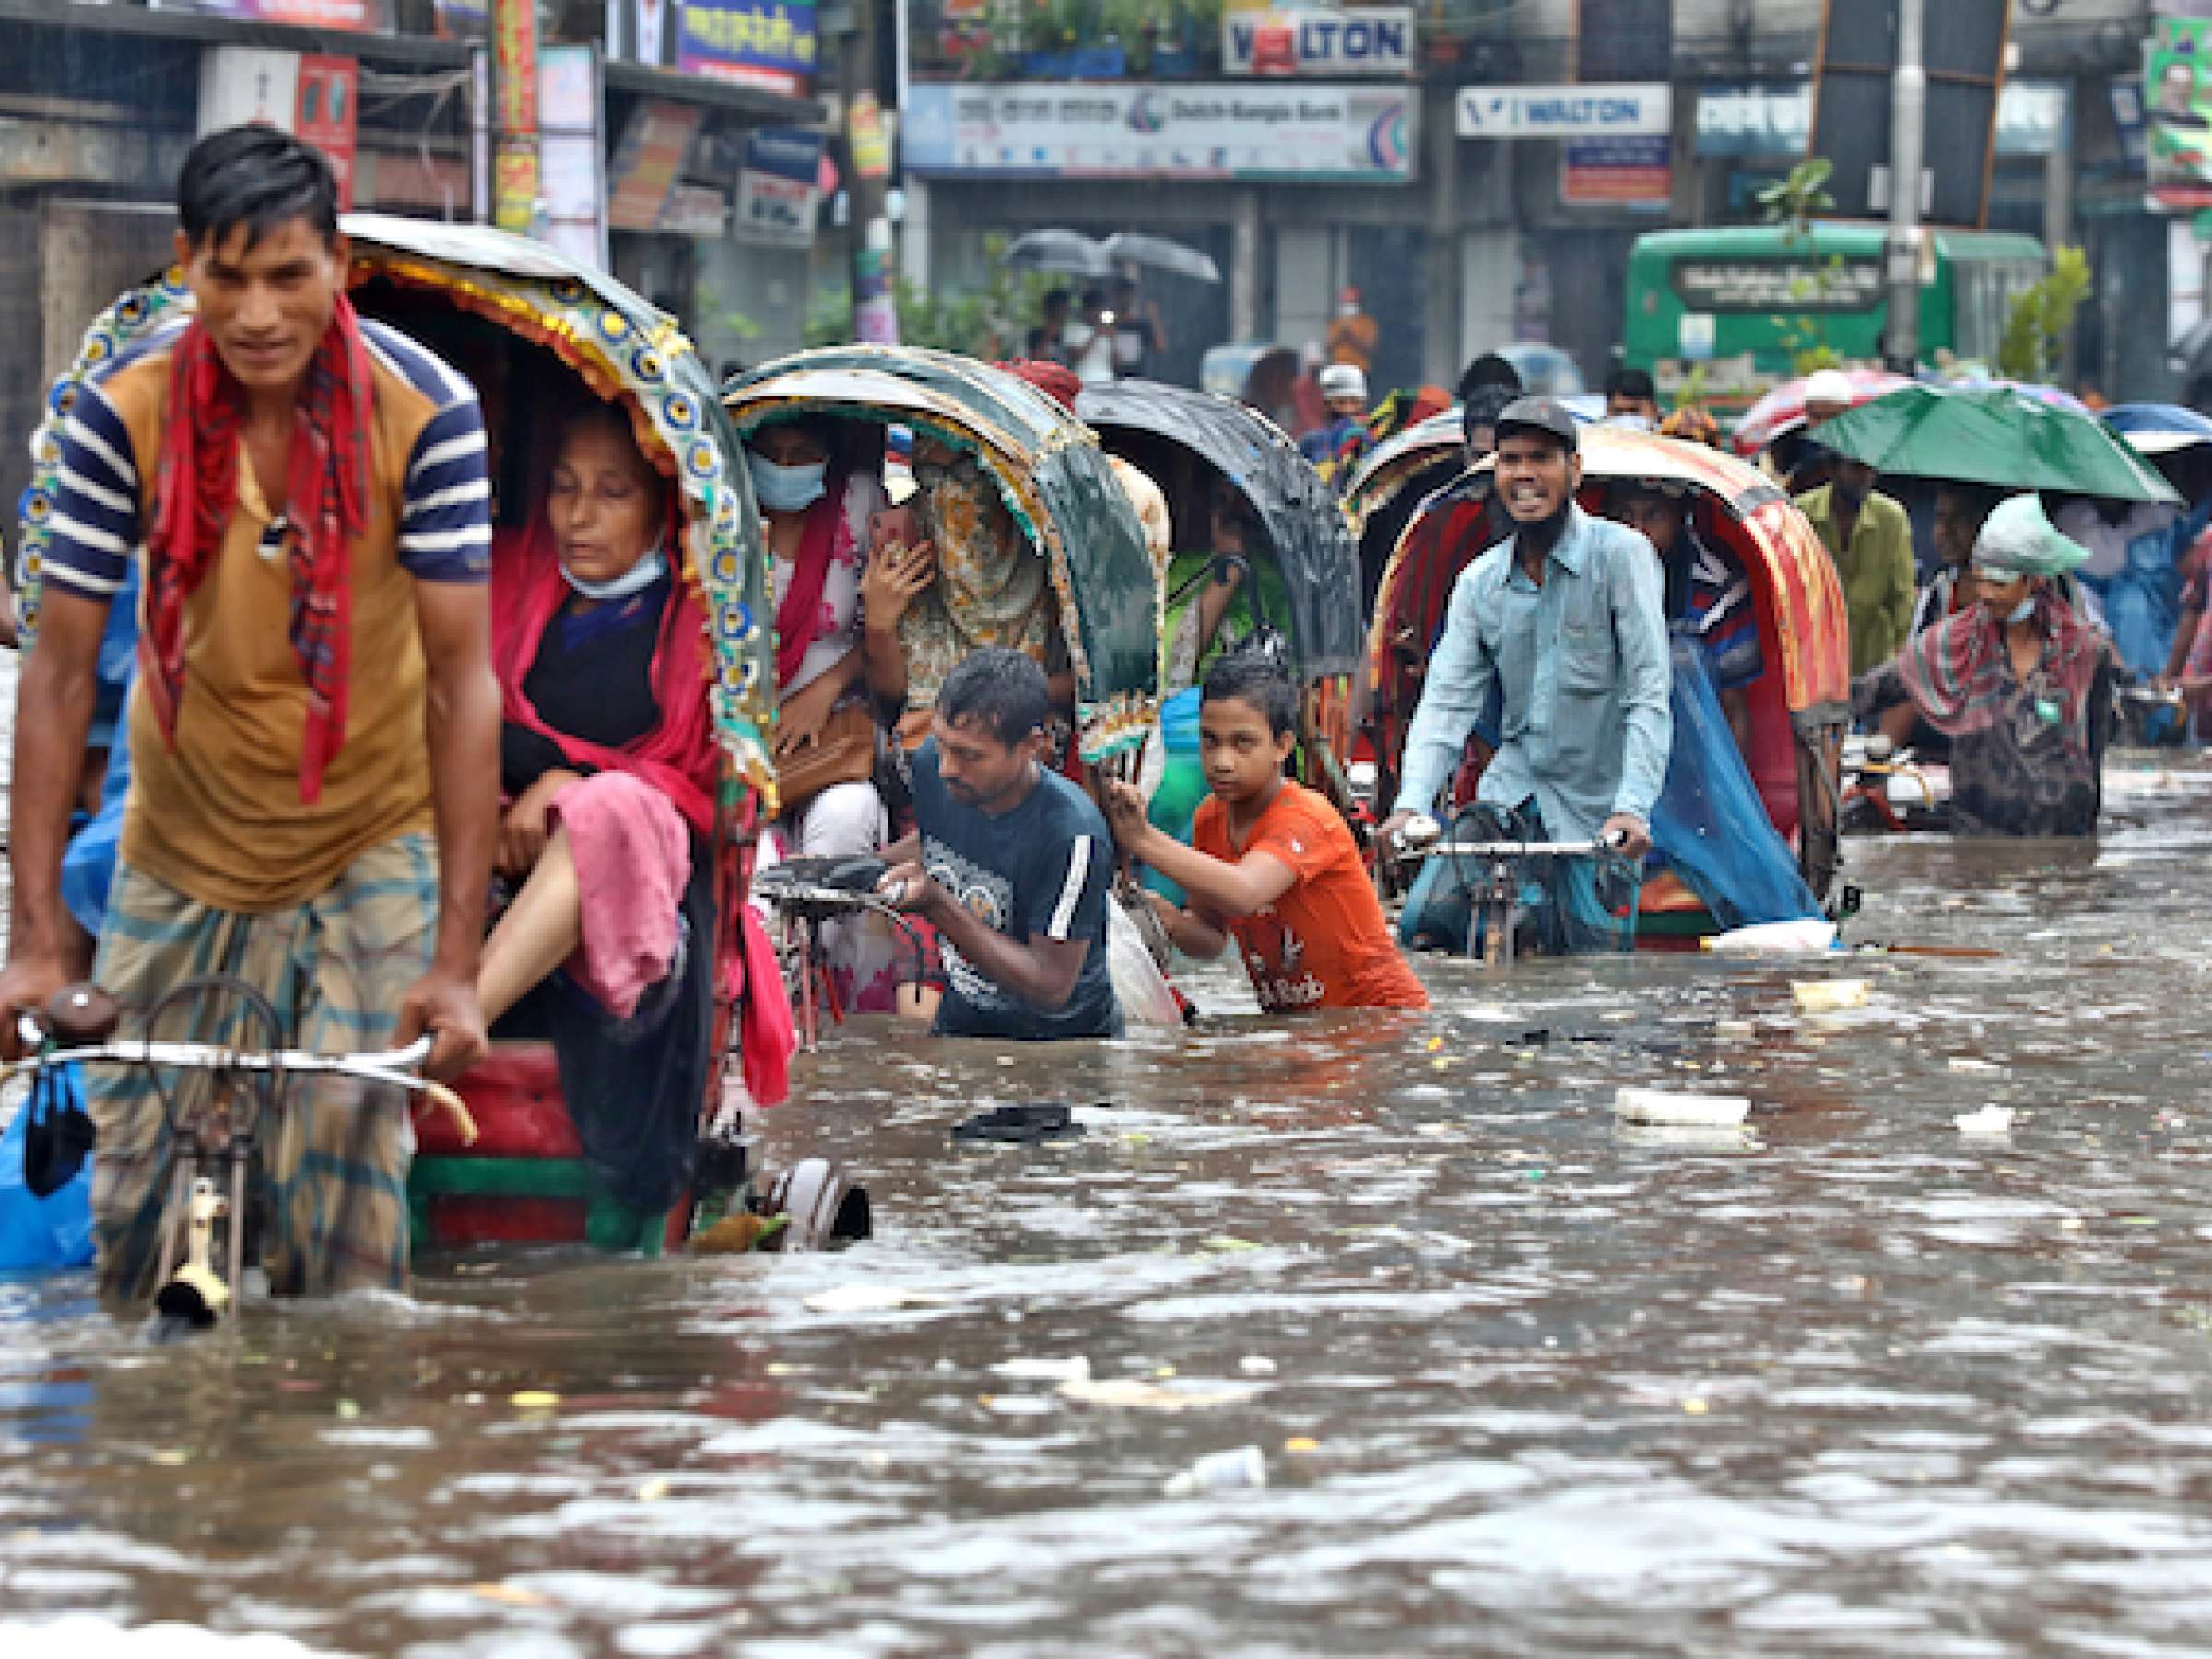 Vehicles try to drive through a flooded street in Dhaka.